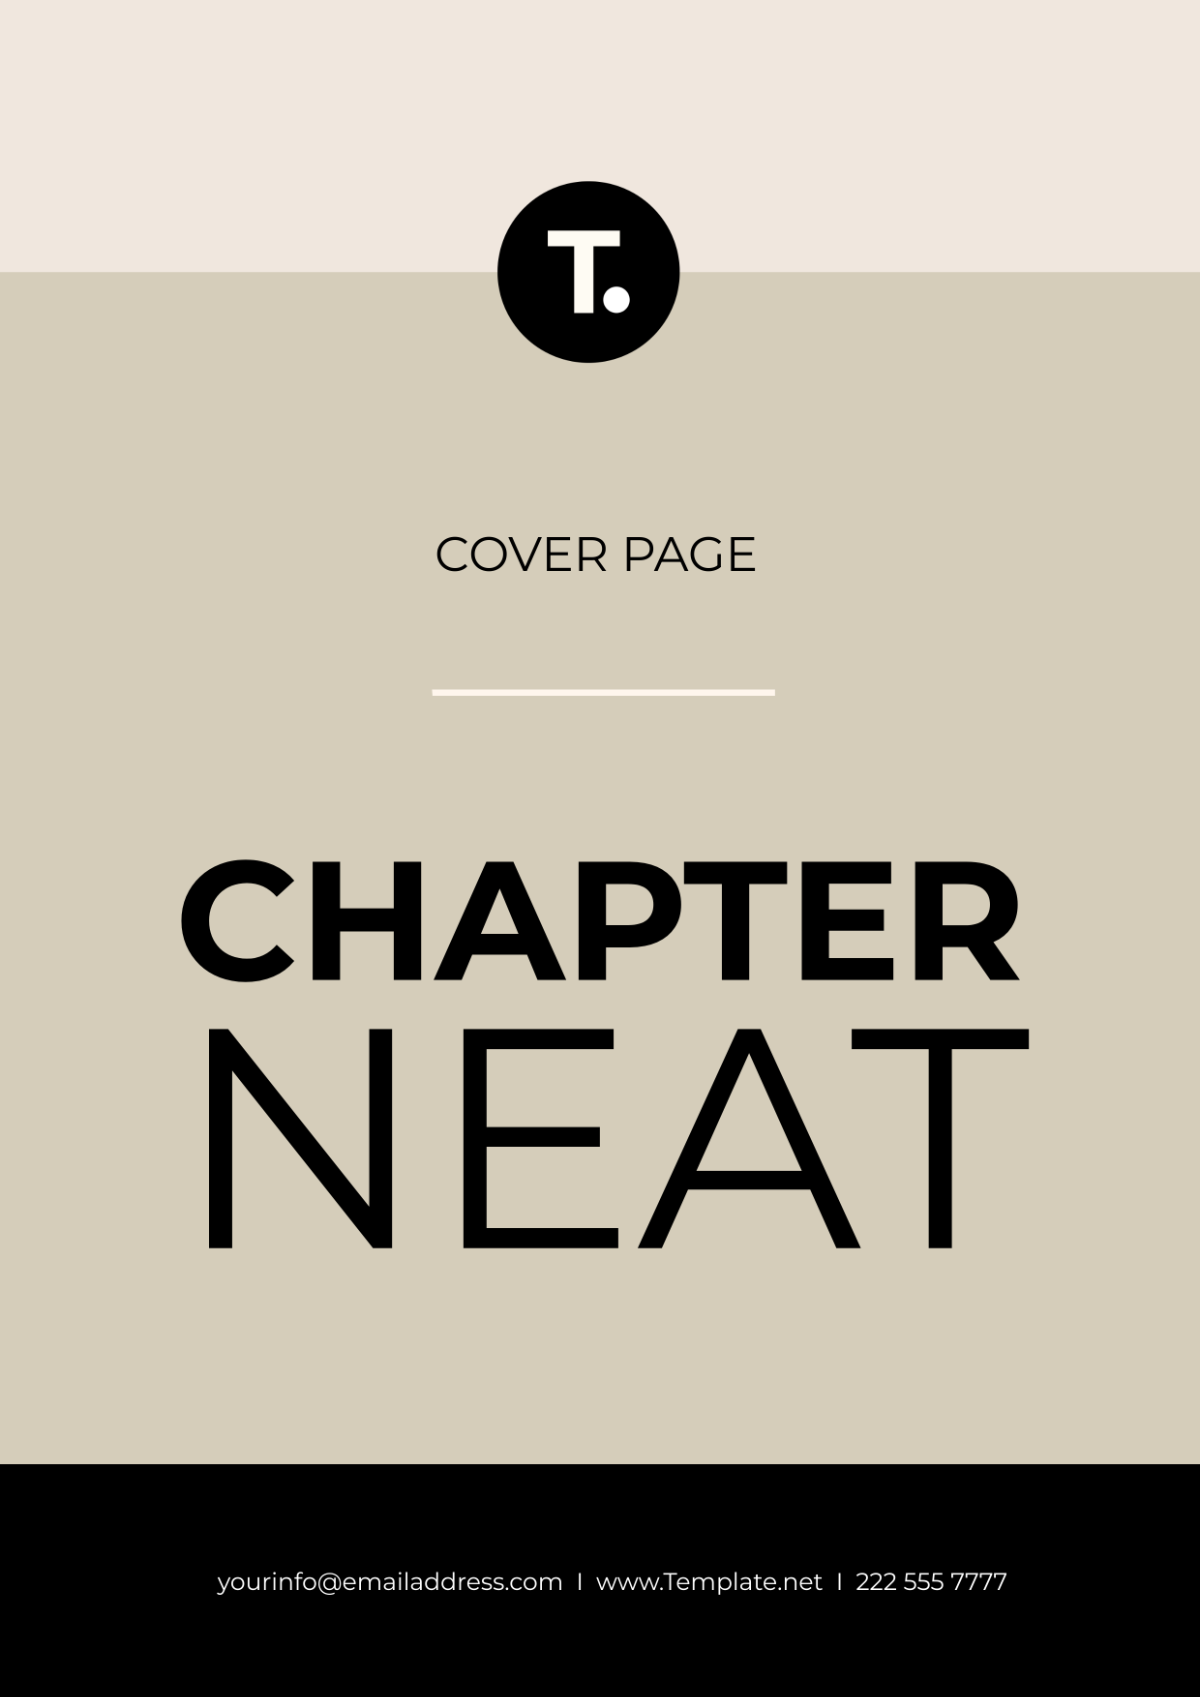 Chapter Neat Cover Page